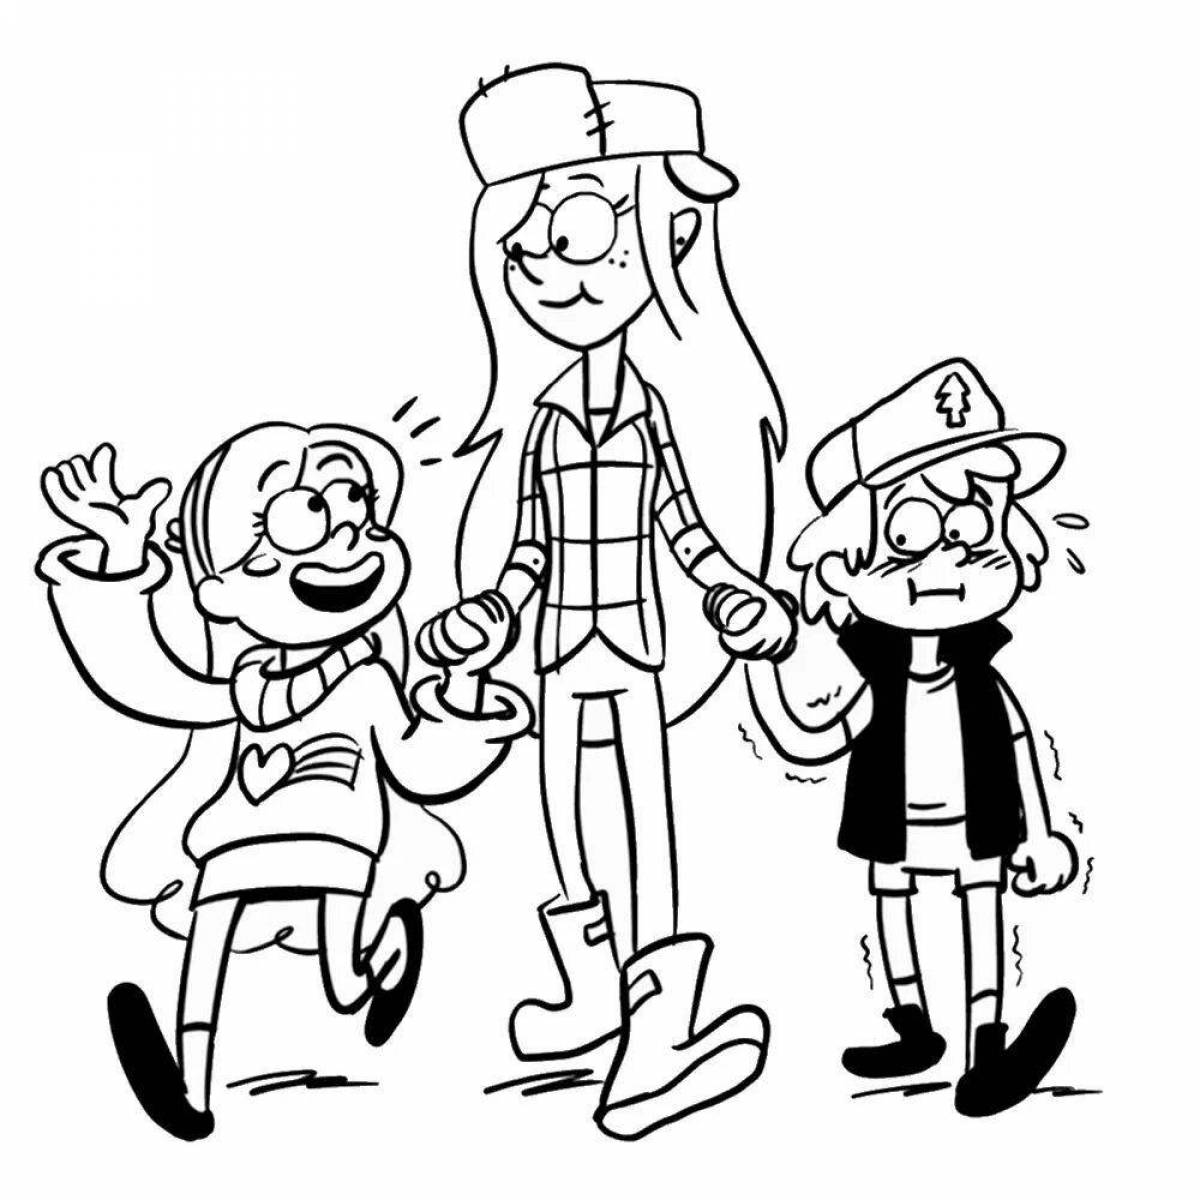 Gravity falls mabel and dipper stimulation